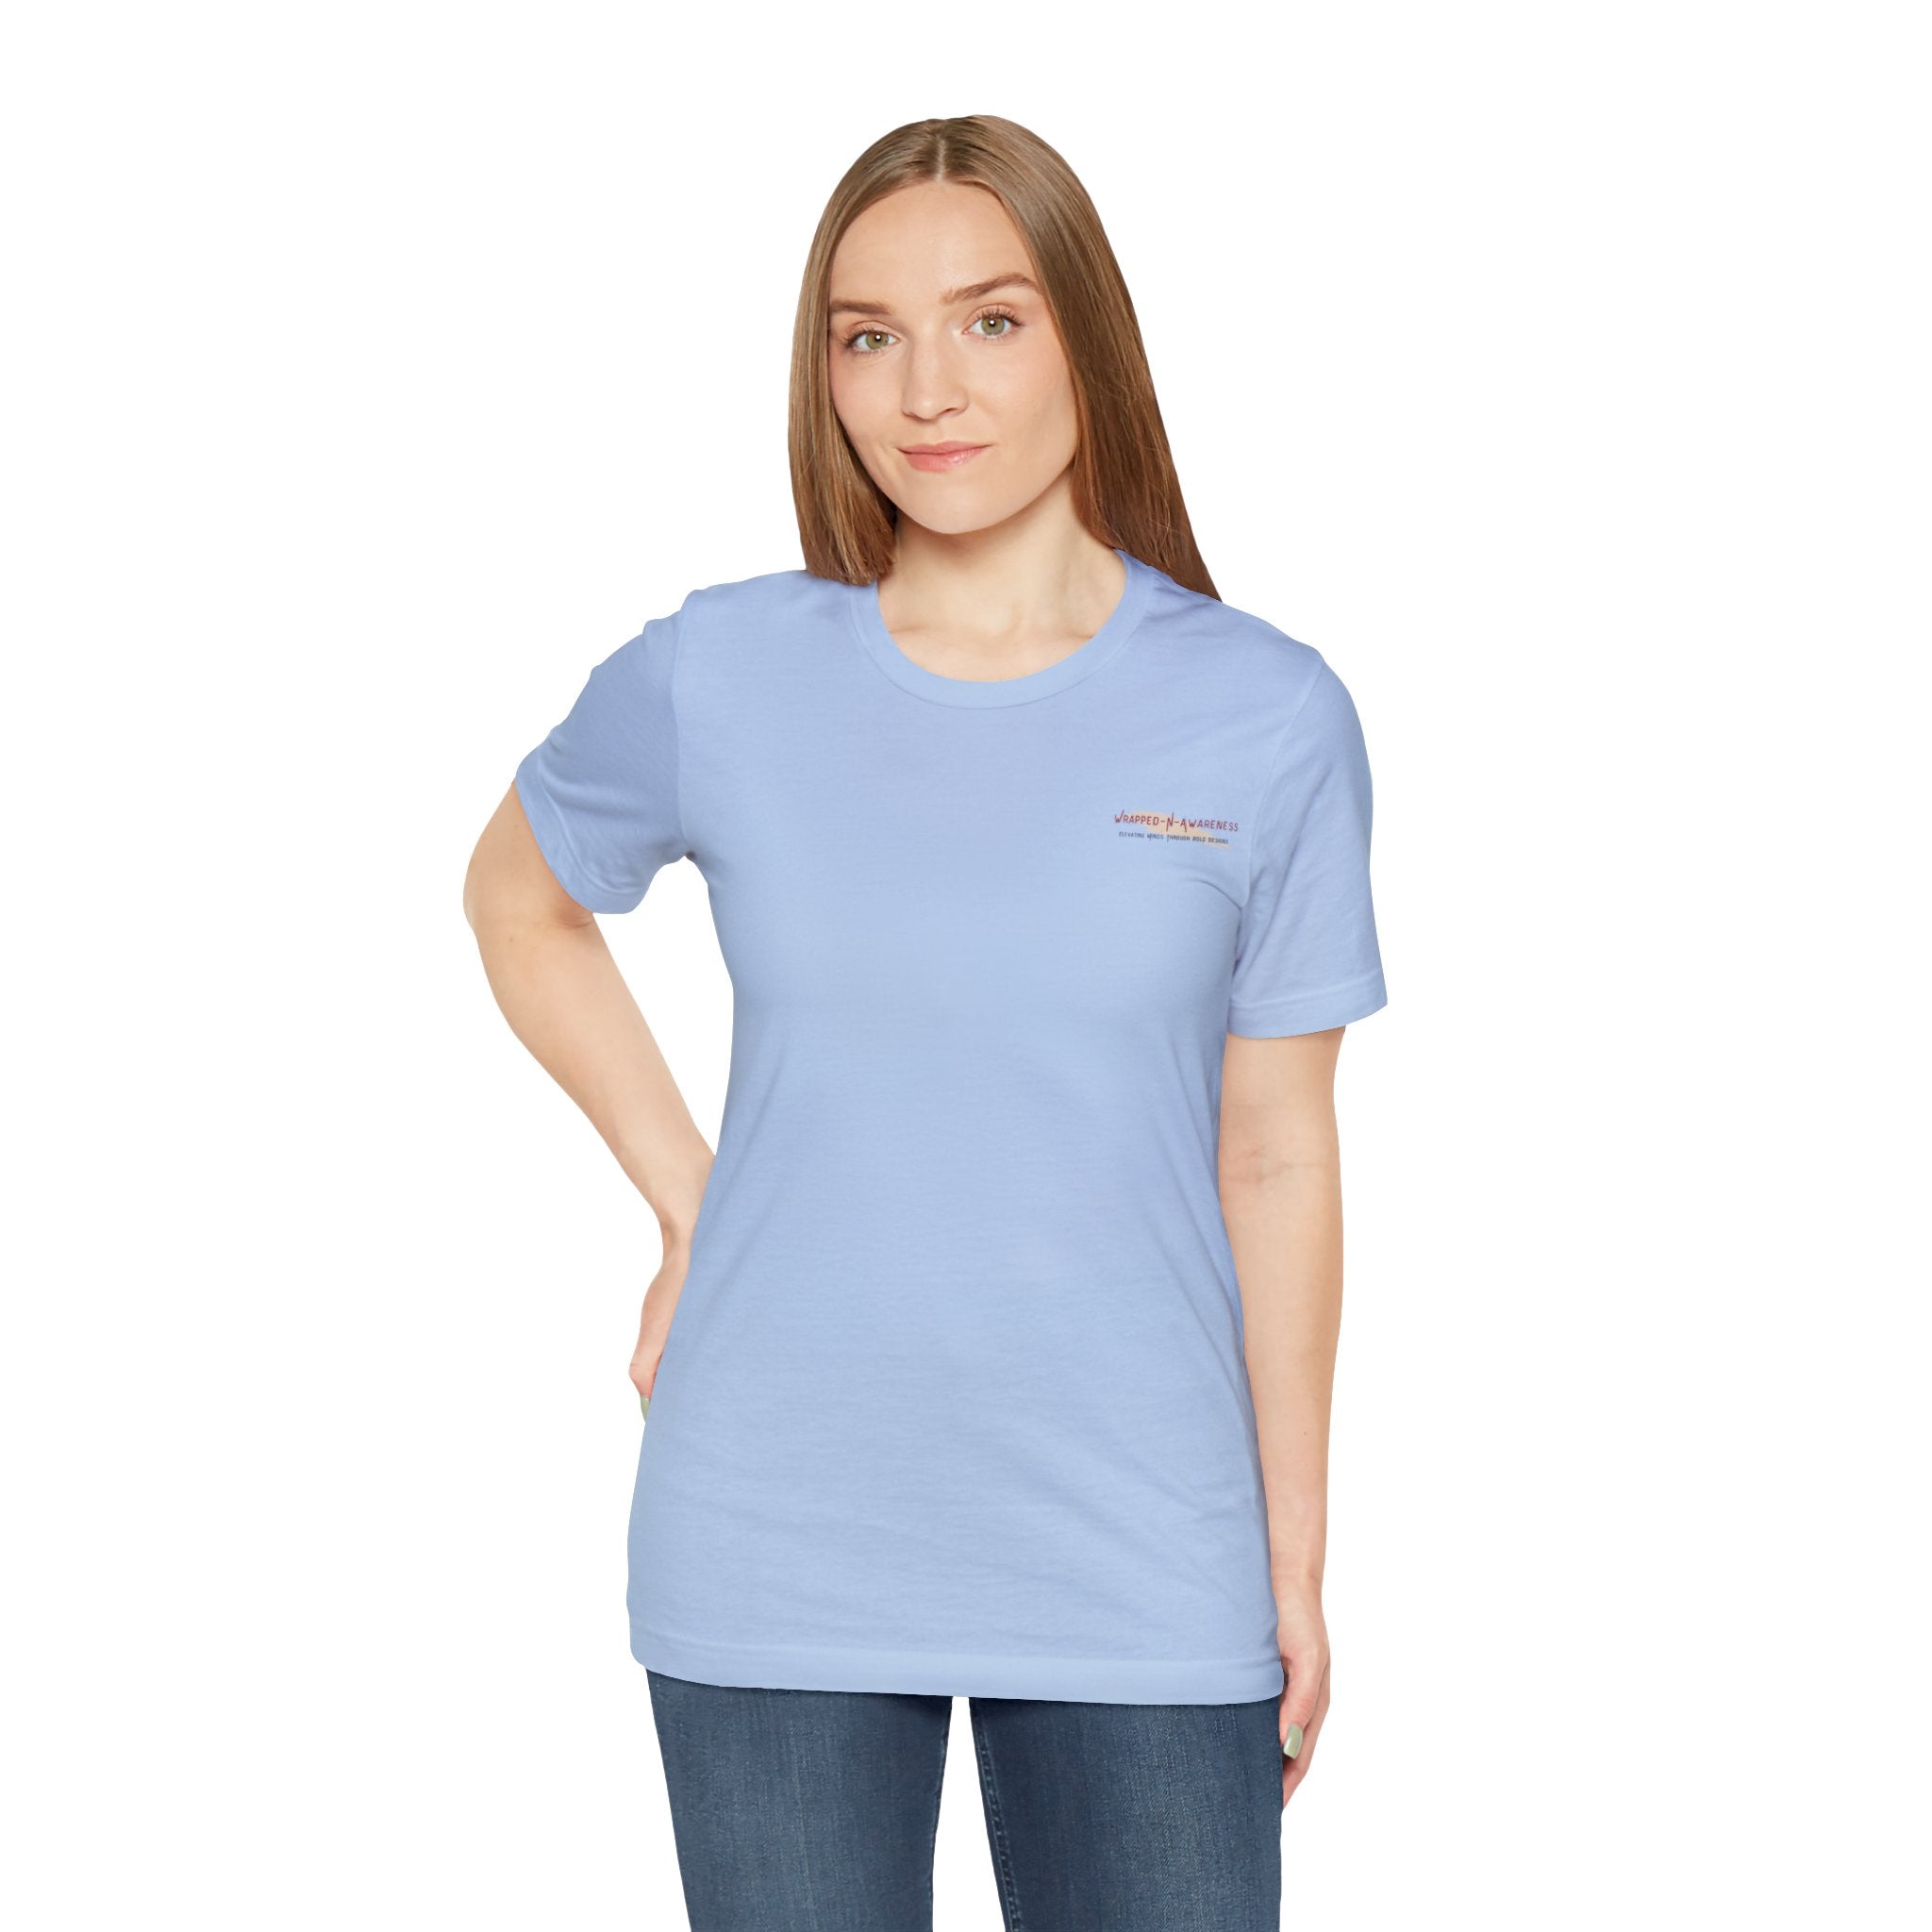 Find Your Balance Jersey Tee - Bella+Canvas 3001 Heather Mauve Airlume Cotton Bella+Canvas 3001 Crew Neckline Jersey Short Sleeve Lightweight Fabric Mental Health Support Retail Fit Tear-away Label Tee Unisex Tee T-Shirt 9152757142632175452_2048 Printify